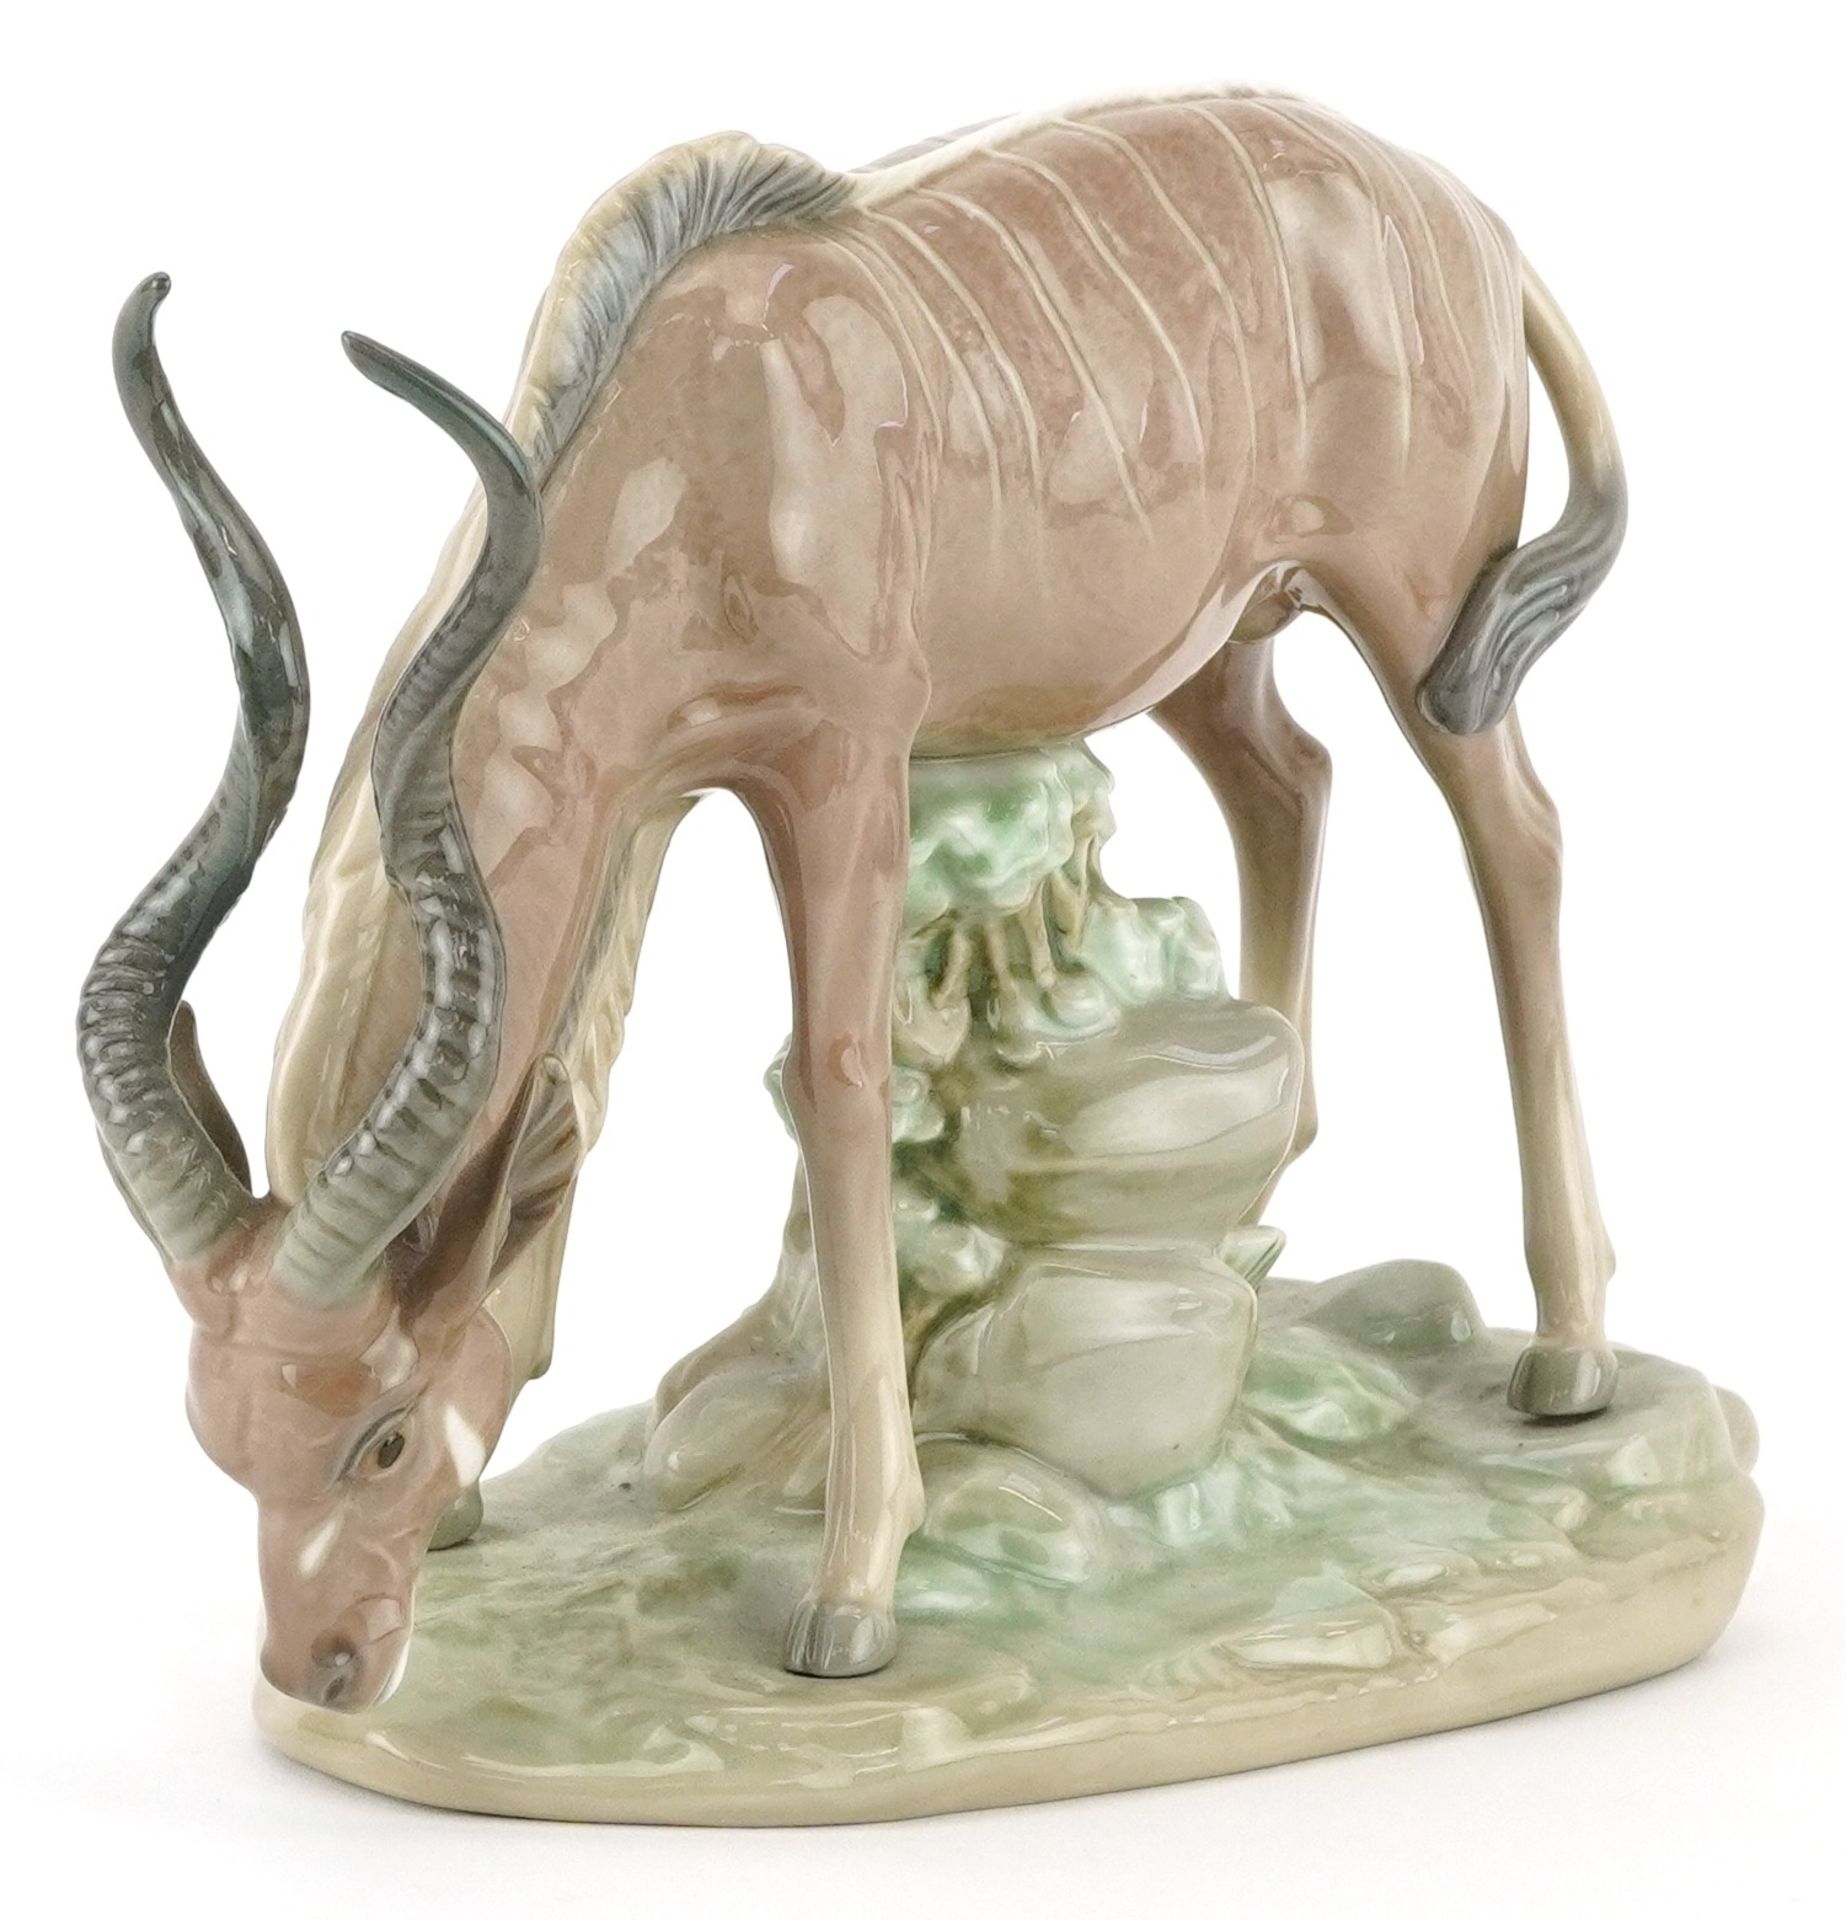 Lladro antelope on naturalistic base, 5302, 23cm in length